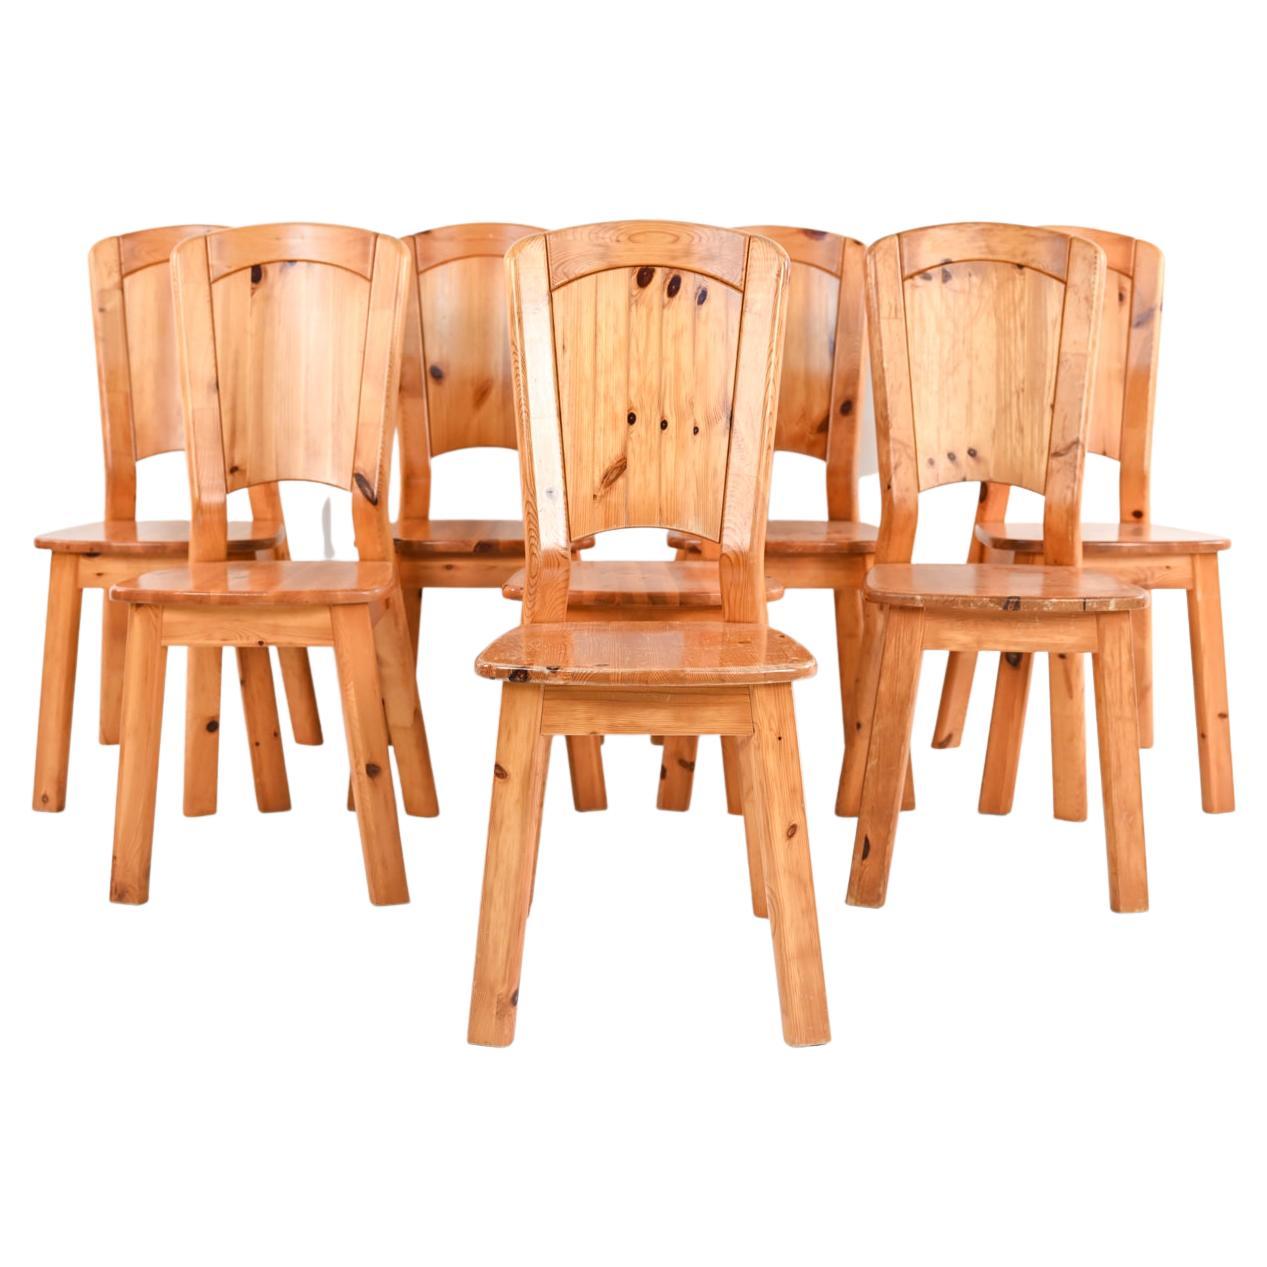 Set of (8) 20th C. Scandinavian Pine Dining Side Chairs